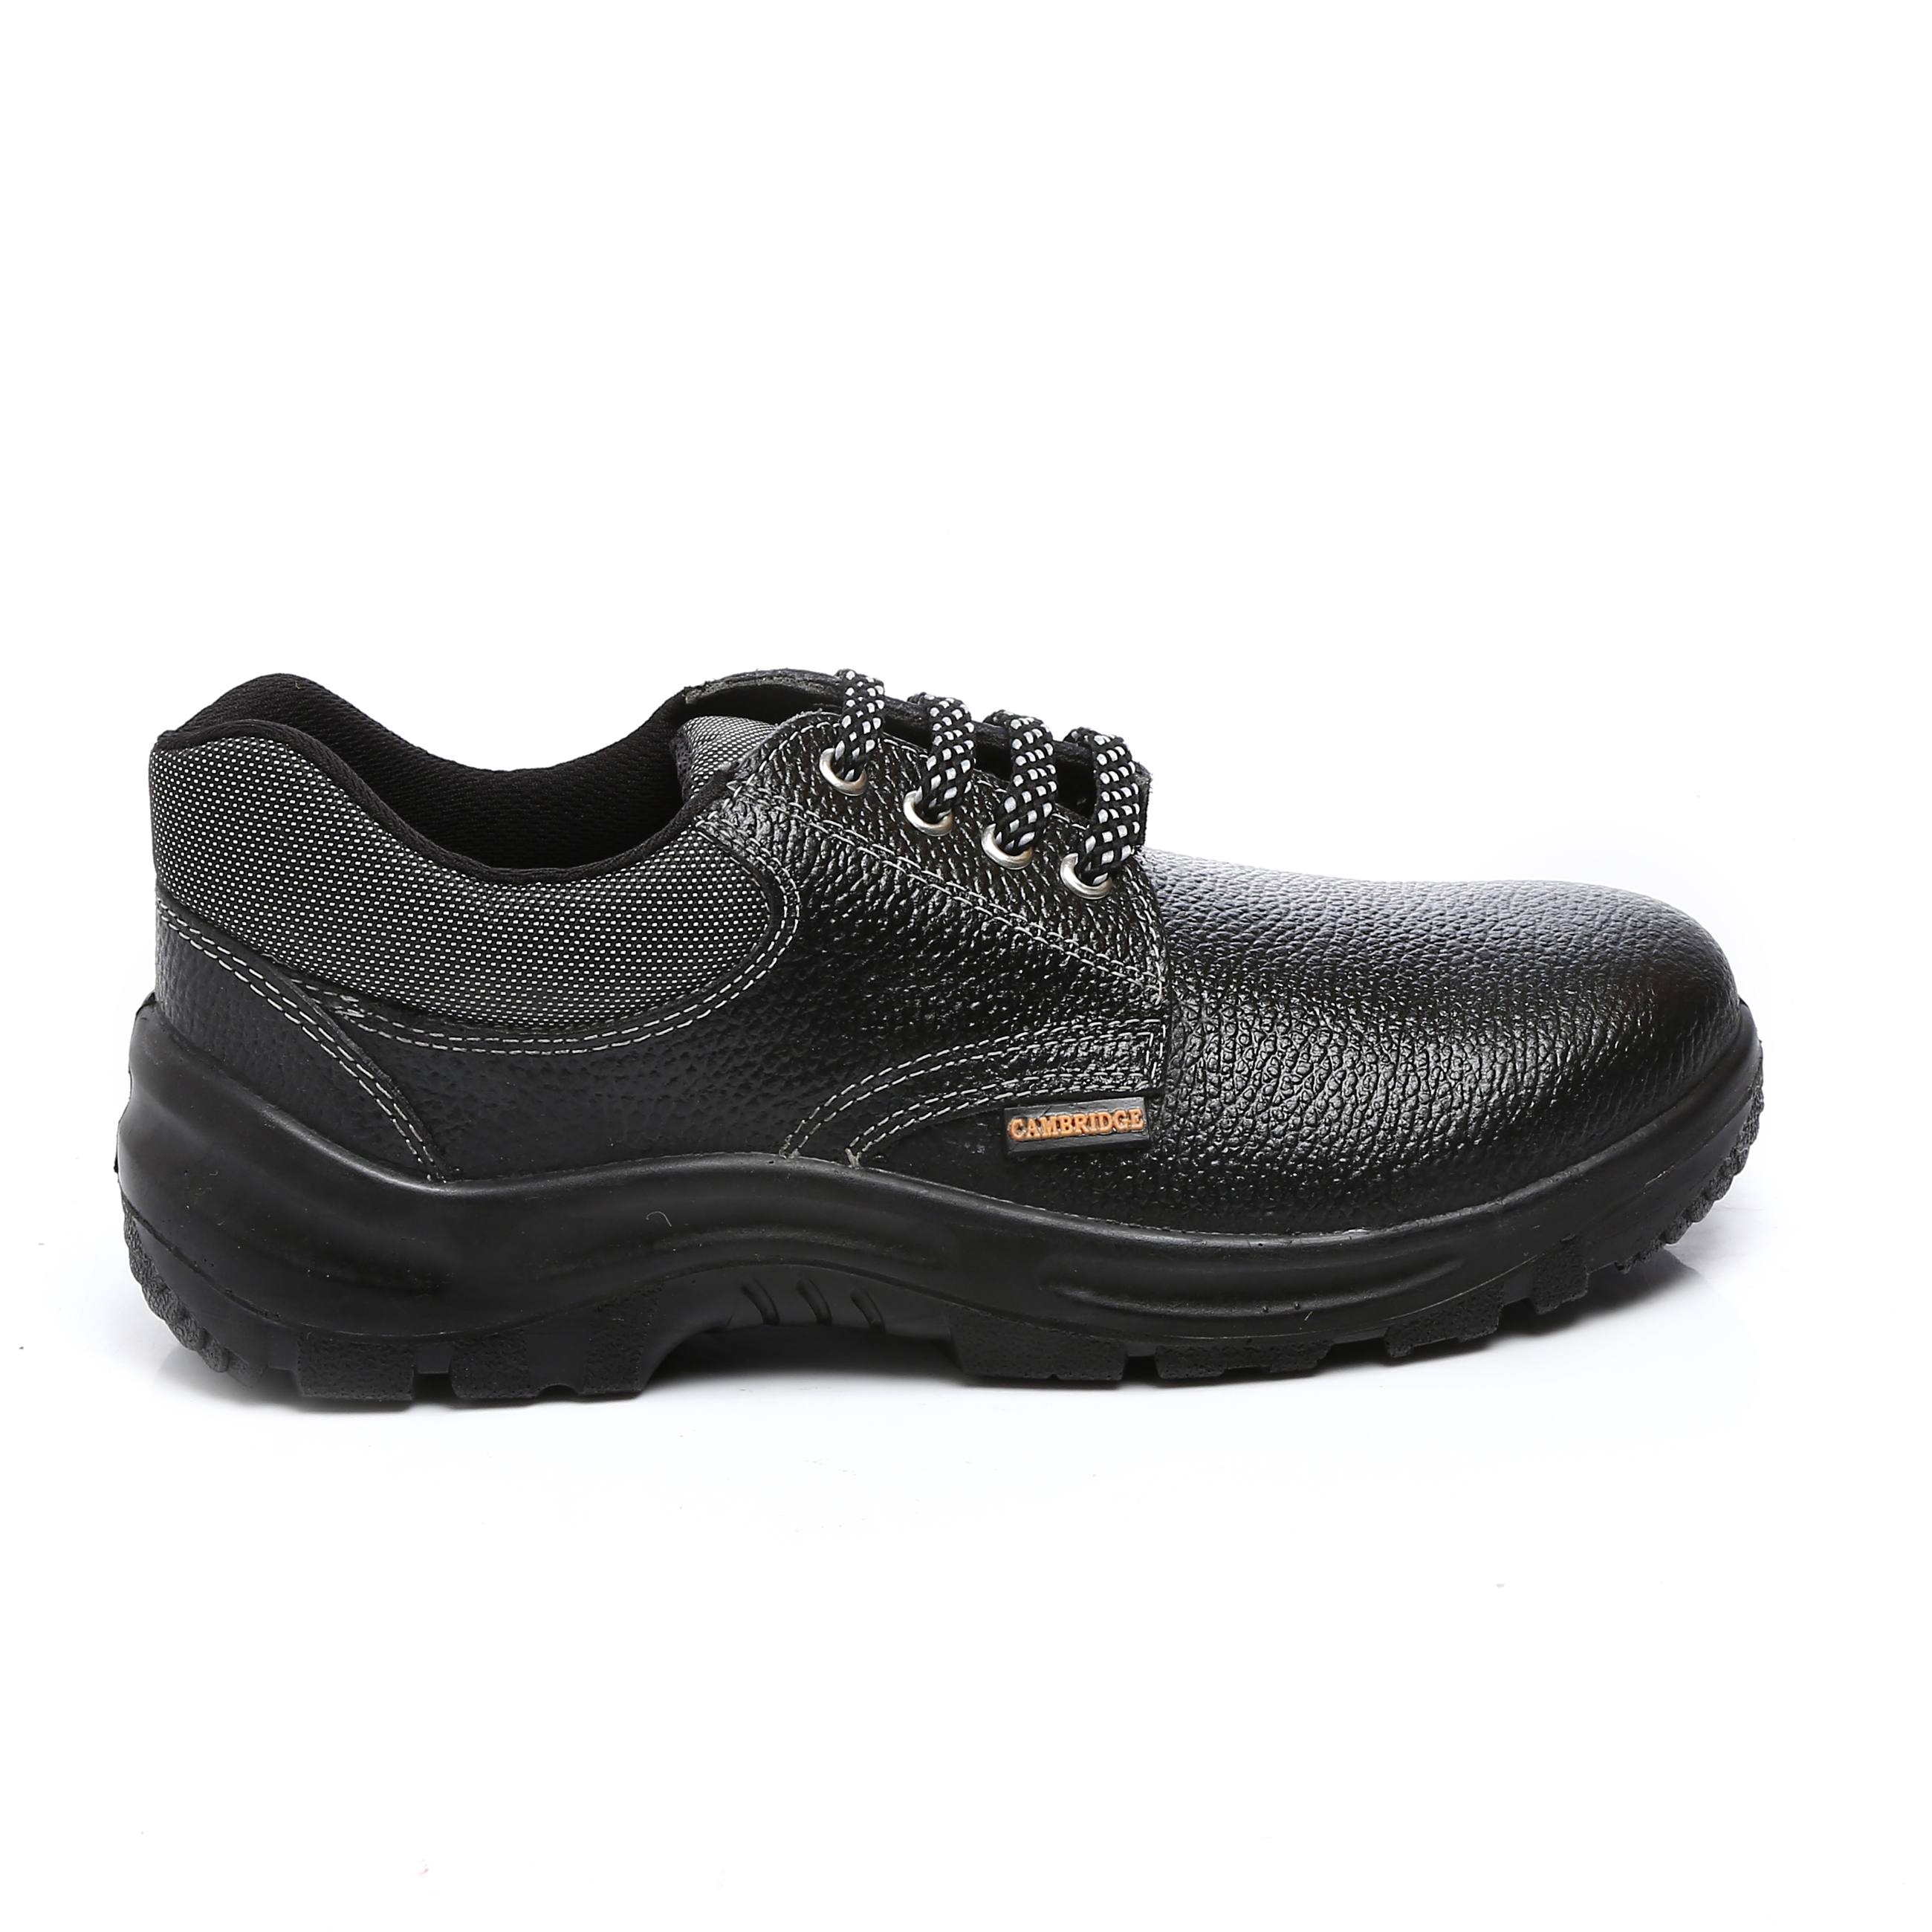 Top Brand Safety shoes